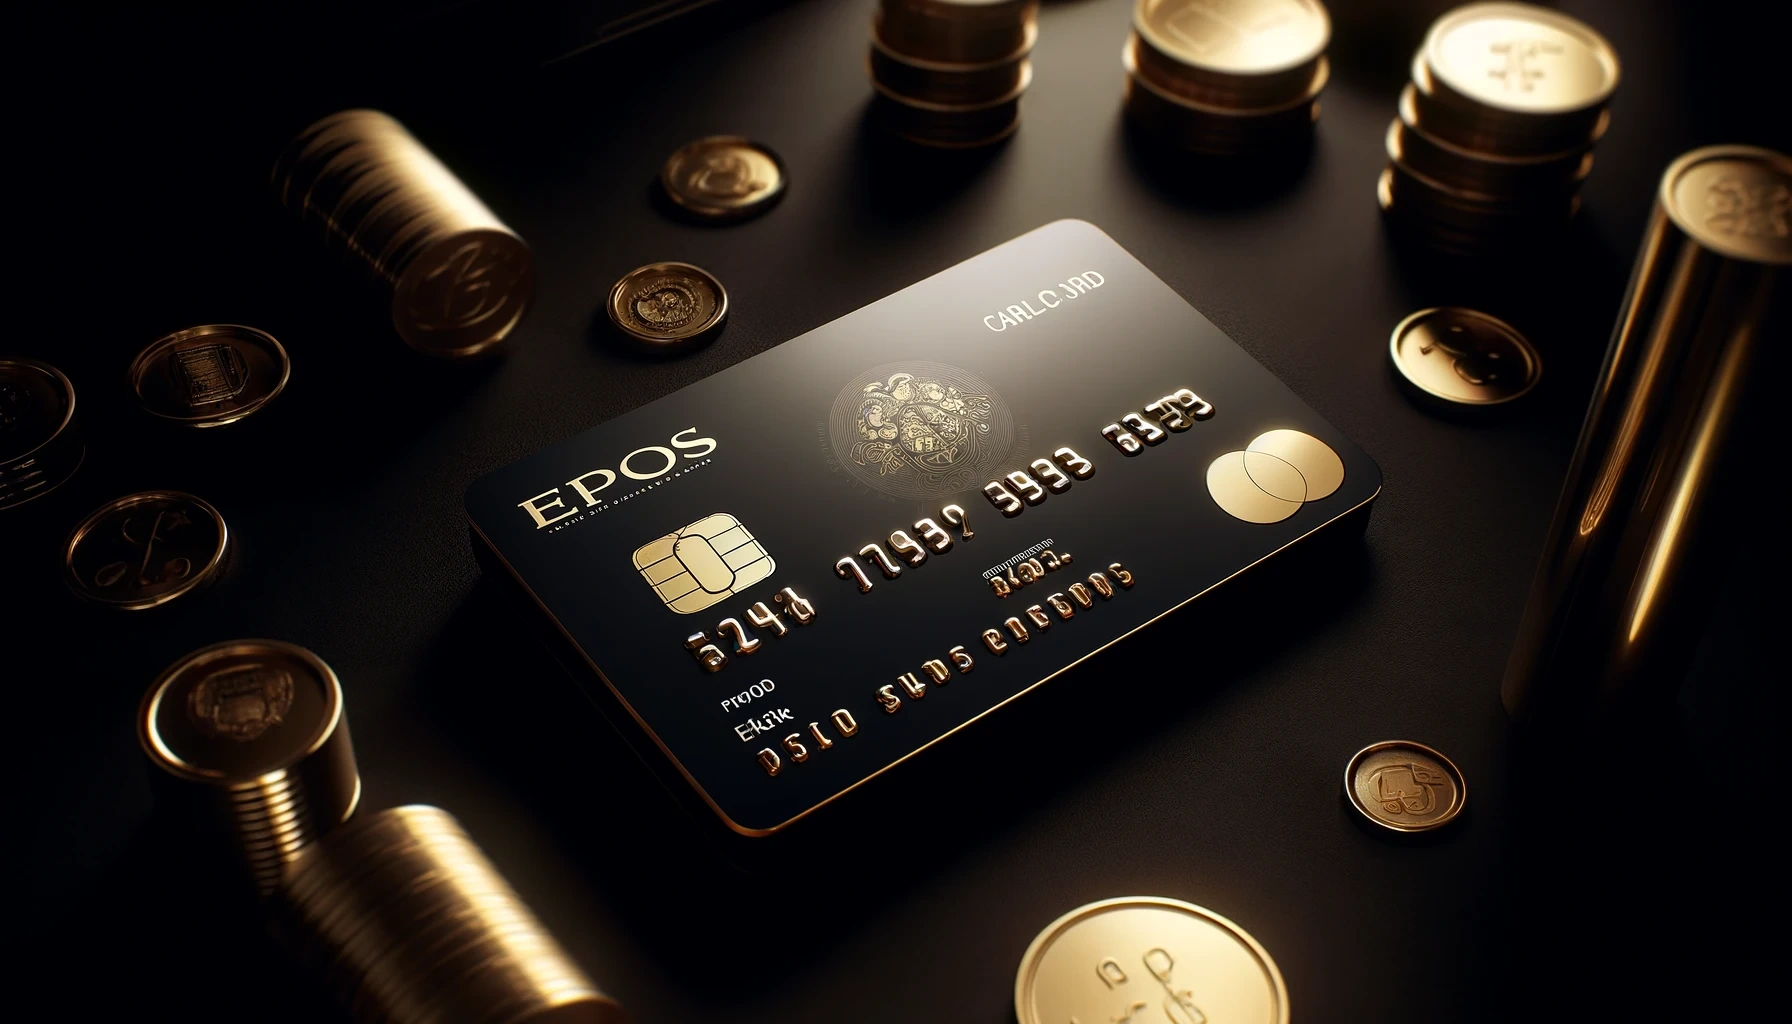 Epos Gold Credit Card - Learn How to Apply